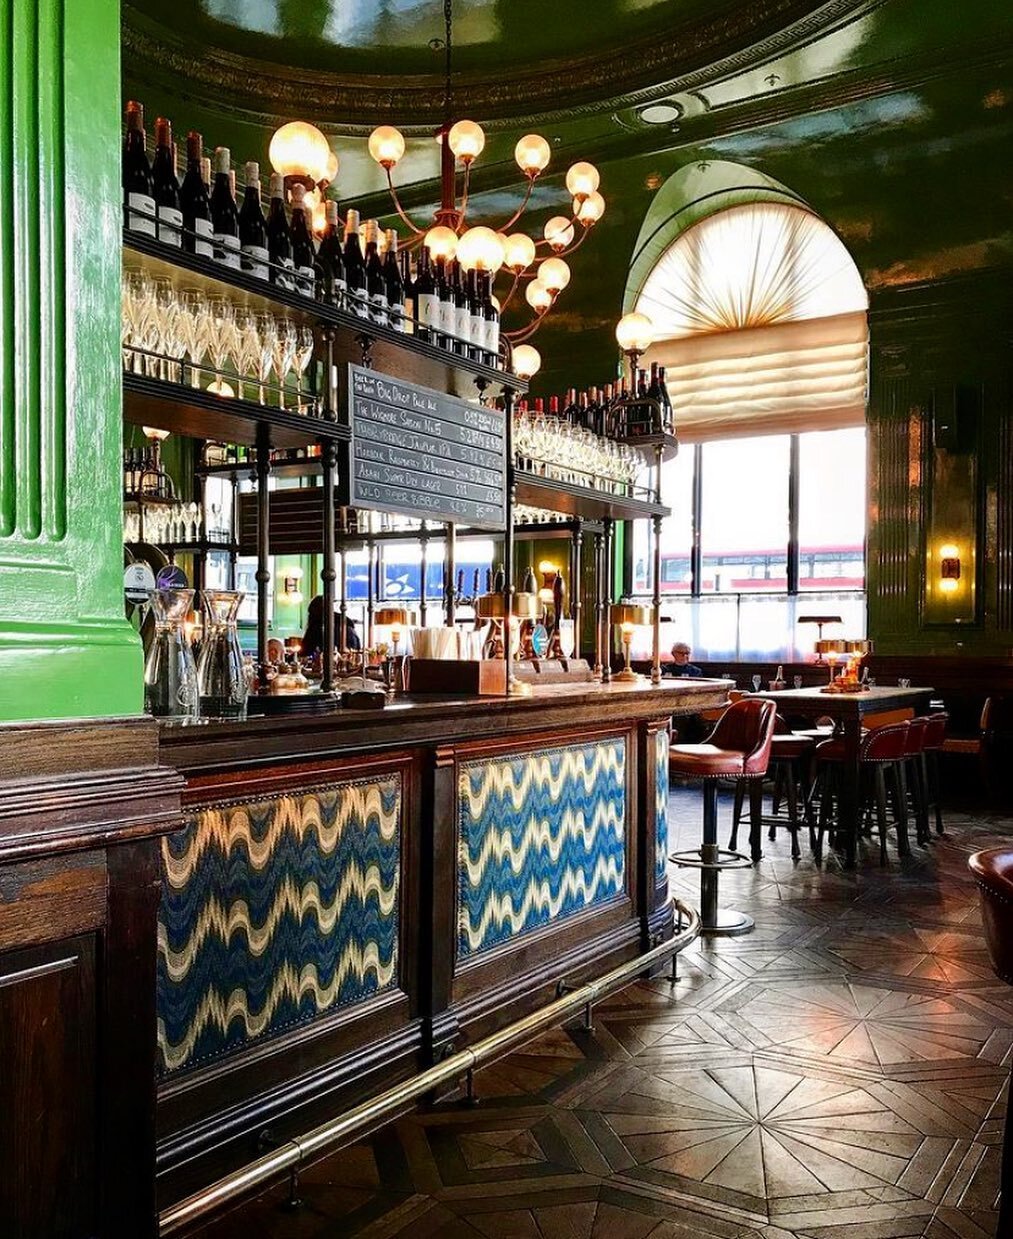 HAPPY ST PATRICK&rsquo;S DAY ☘️ Today we are missing one of our favourite London pubs, The Wigmore at @langham_london. Counting down the days for the world to reopen and we will all be raising a glass! 

Photo-credit: @the_lois_edit 

#stpatricksday 